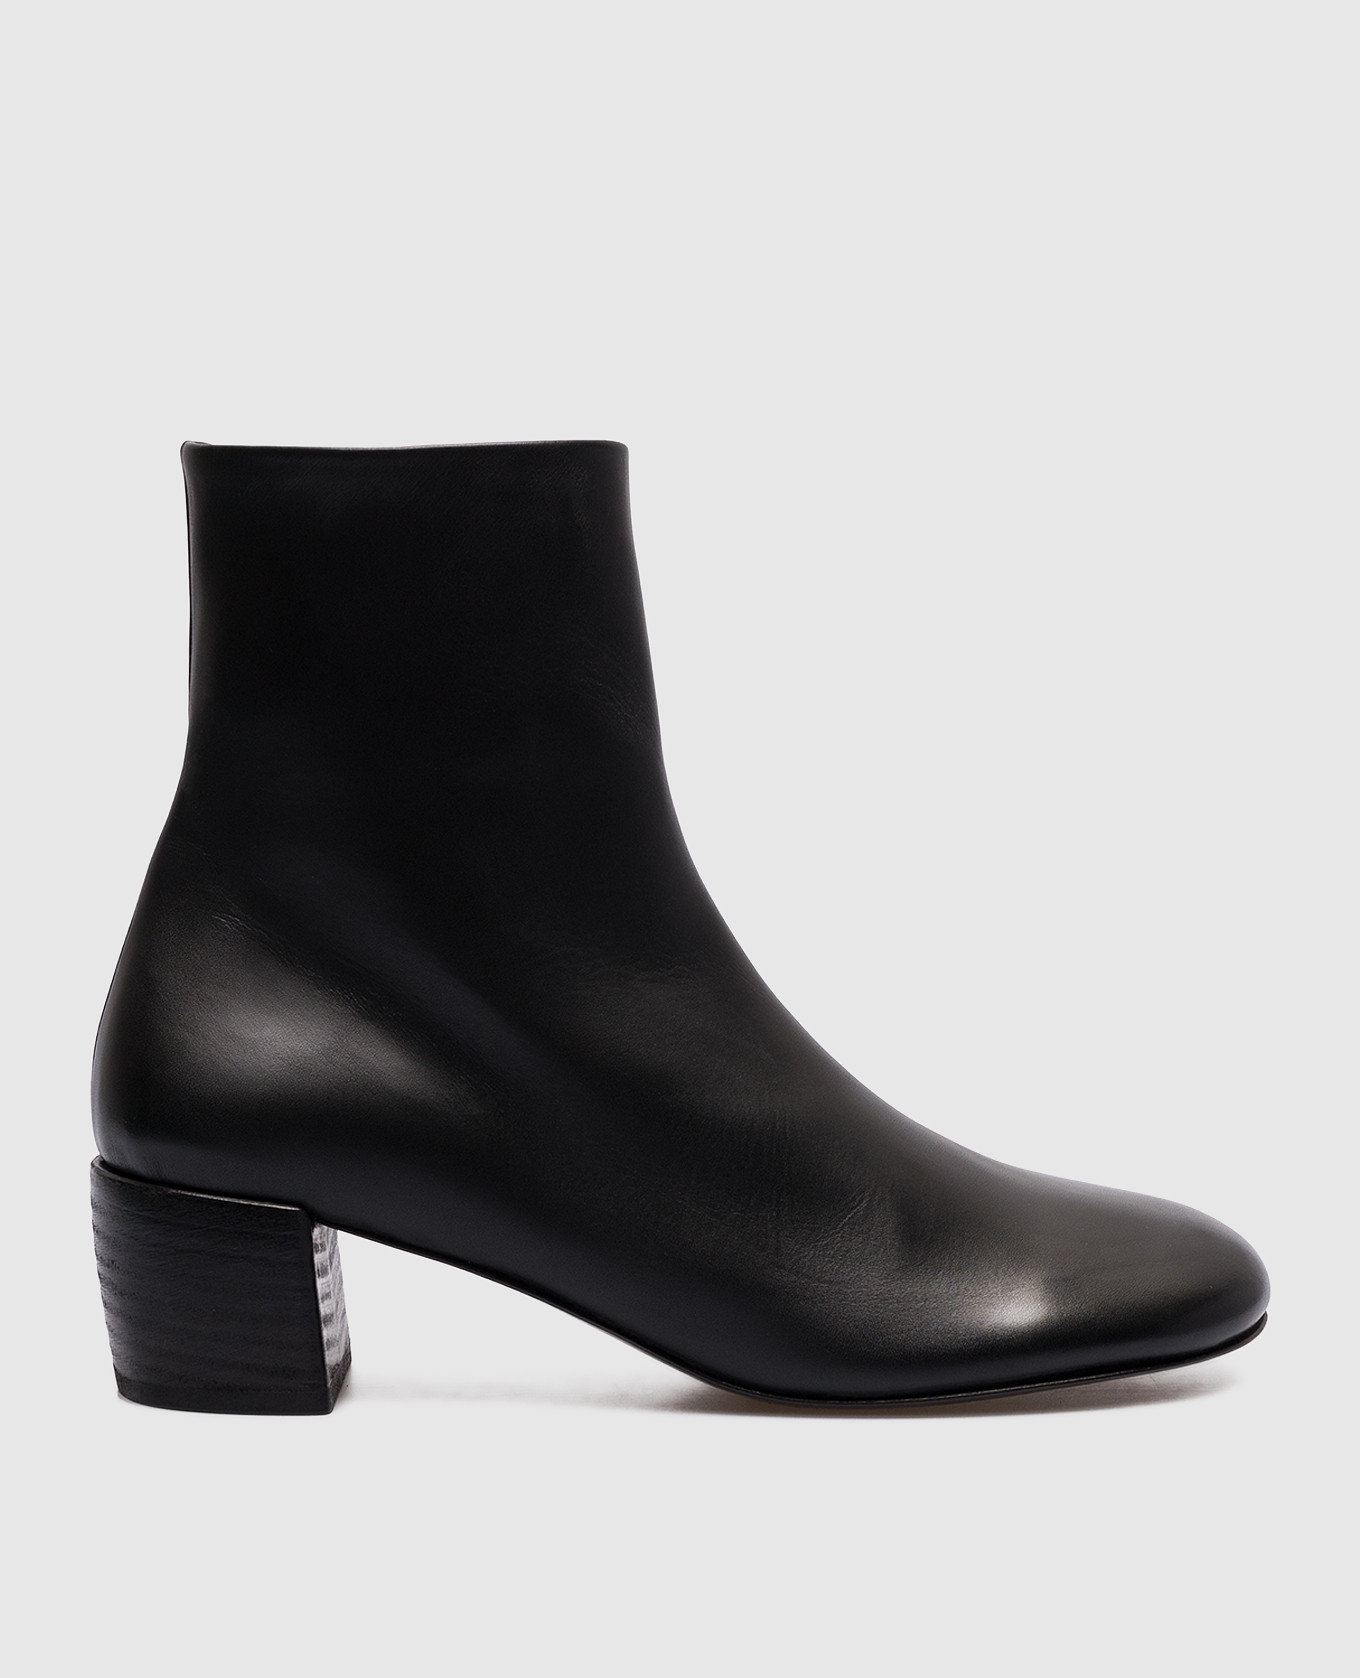 Black leather ankle boots by Ottantotto